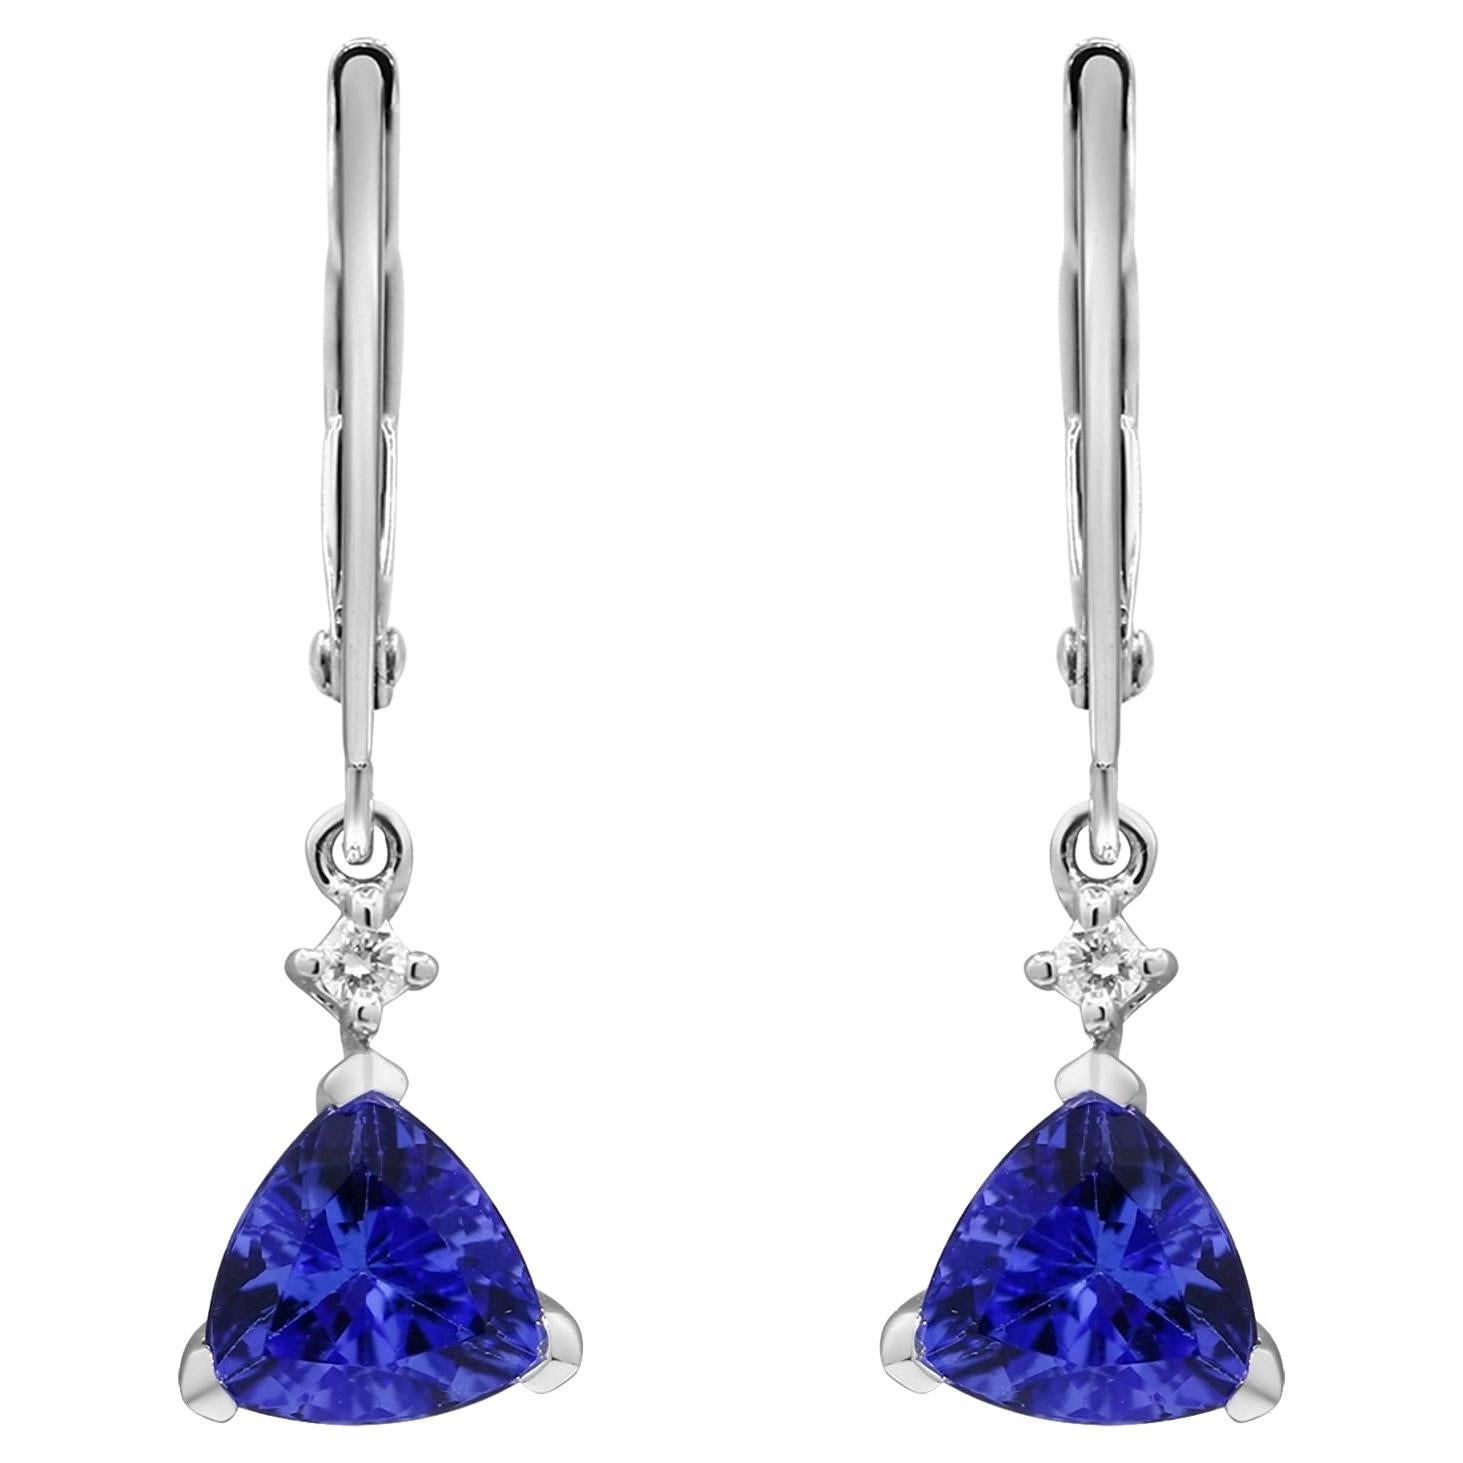 1.13 carat Trillion-cut Tanzanite With Diamond accents 14K White Gold Earring. For Sale